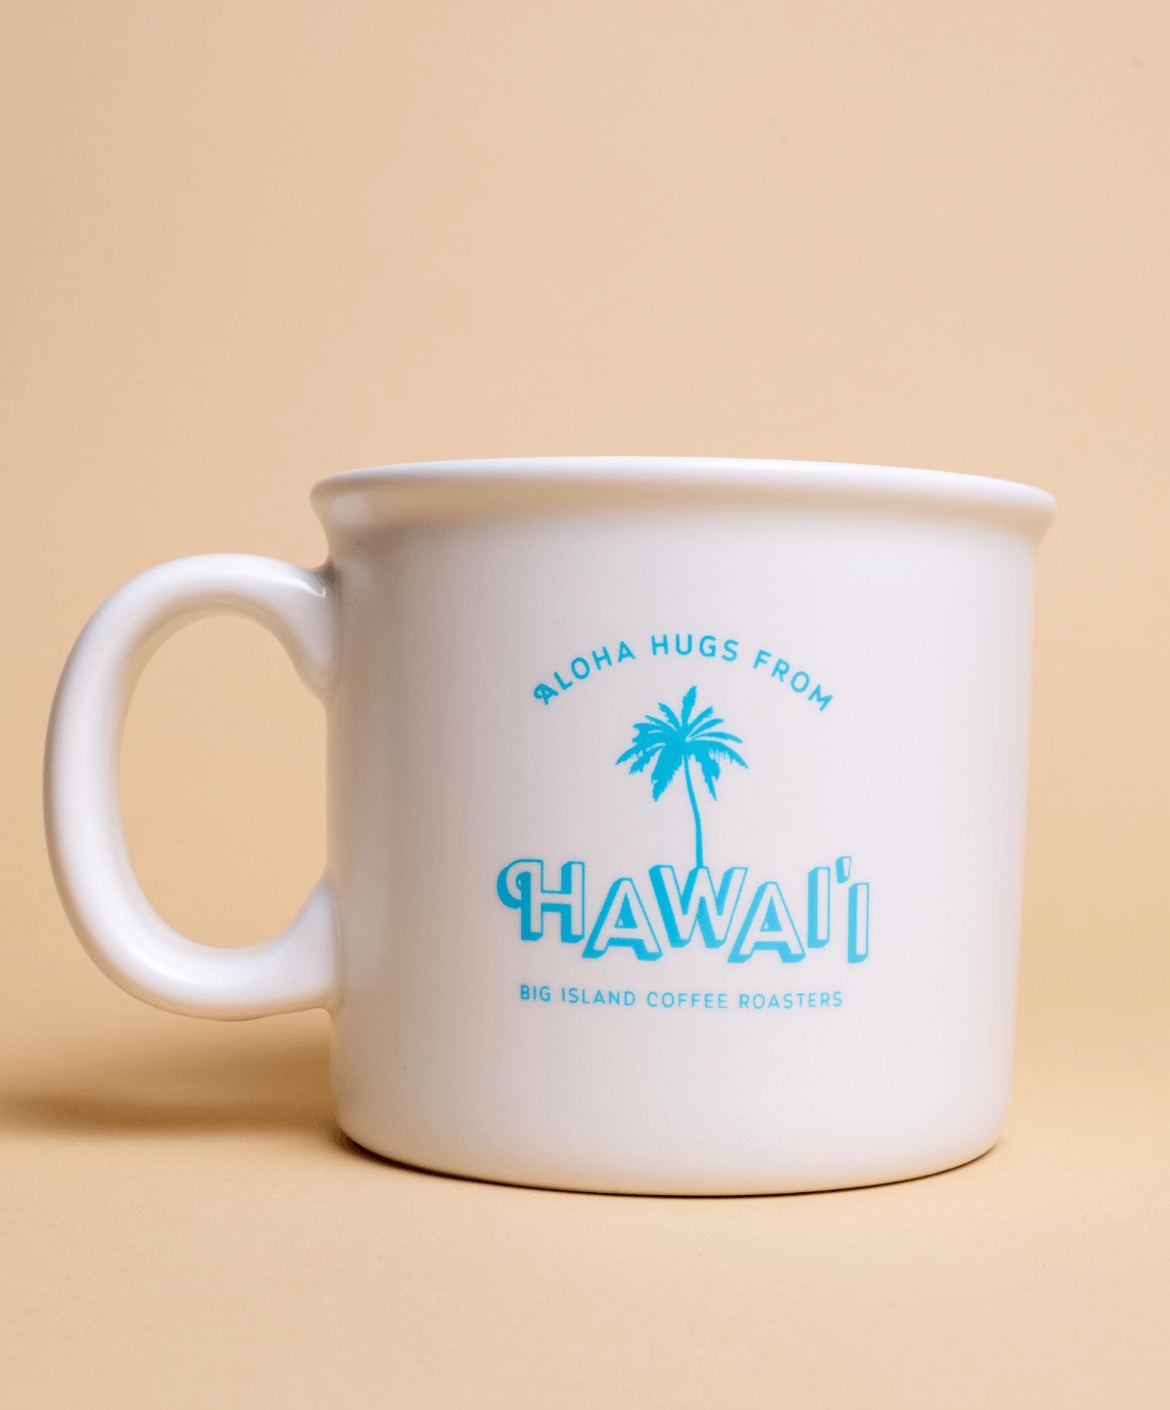 The Hawaiian coffee cup collection - Picture of Starbucks, Maui